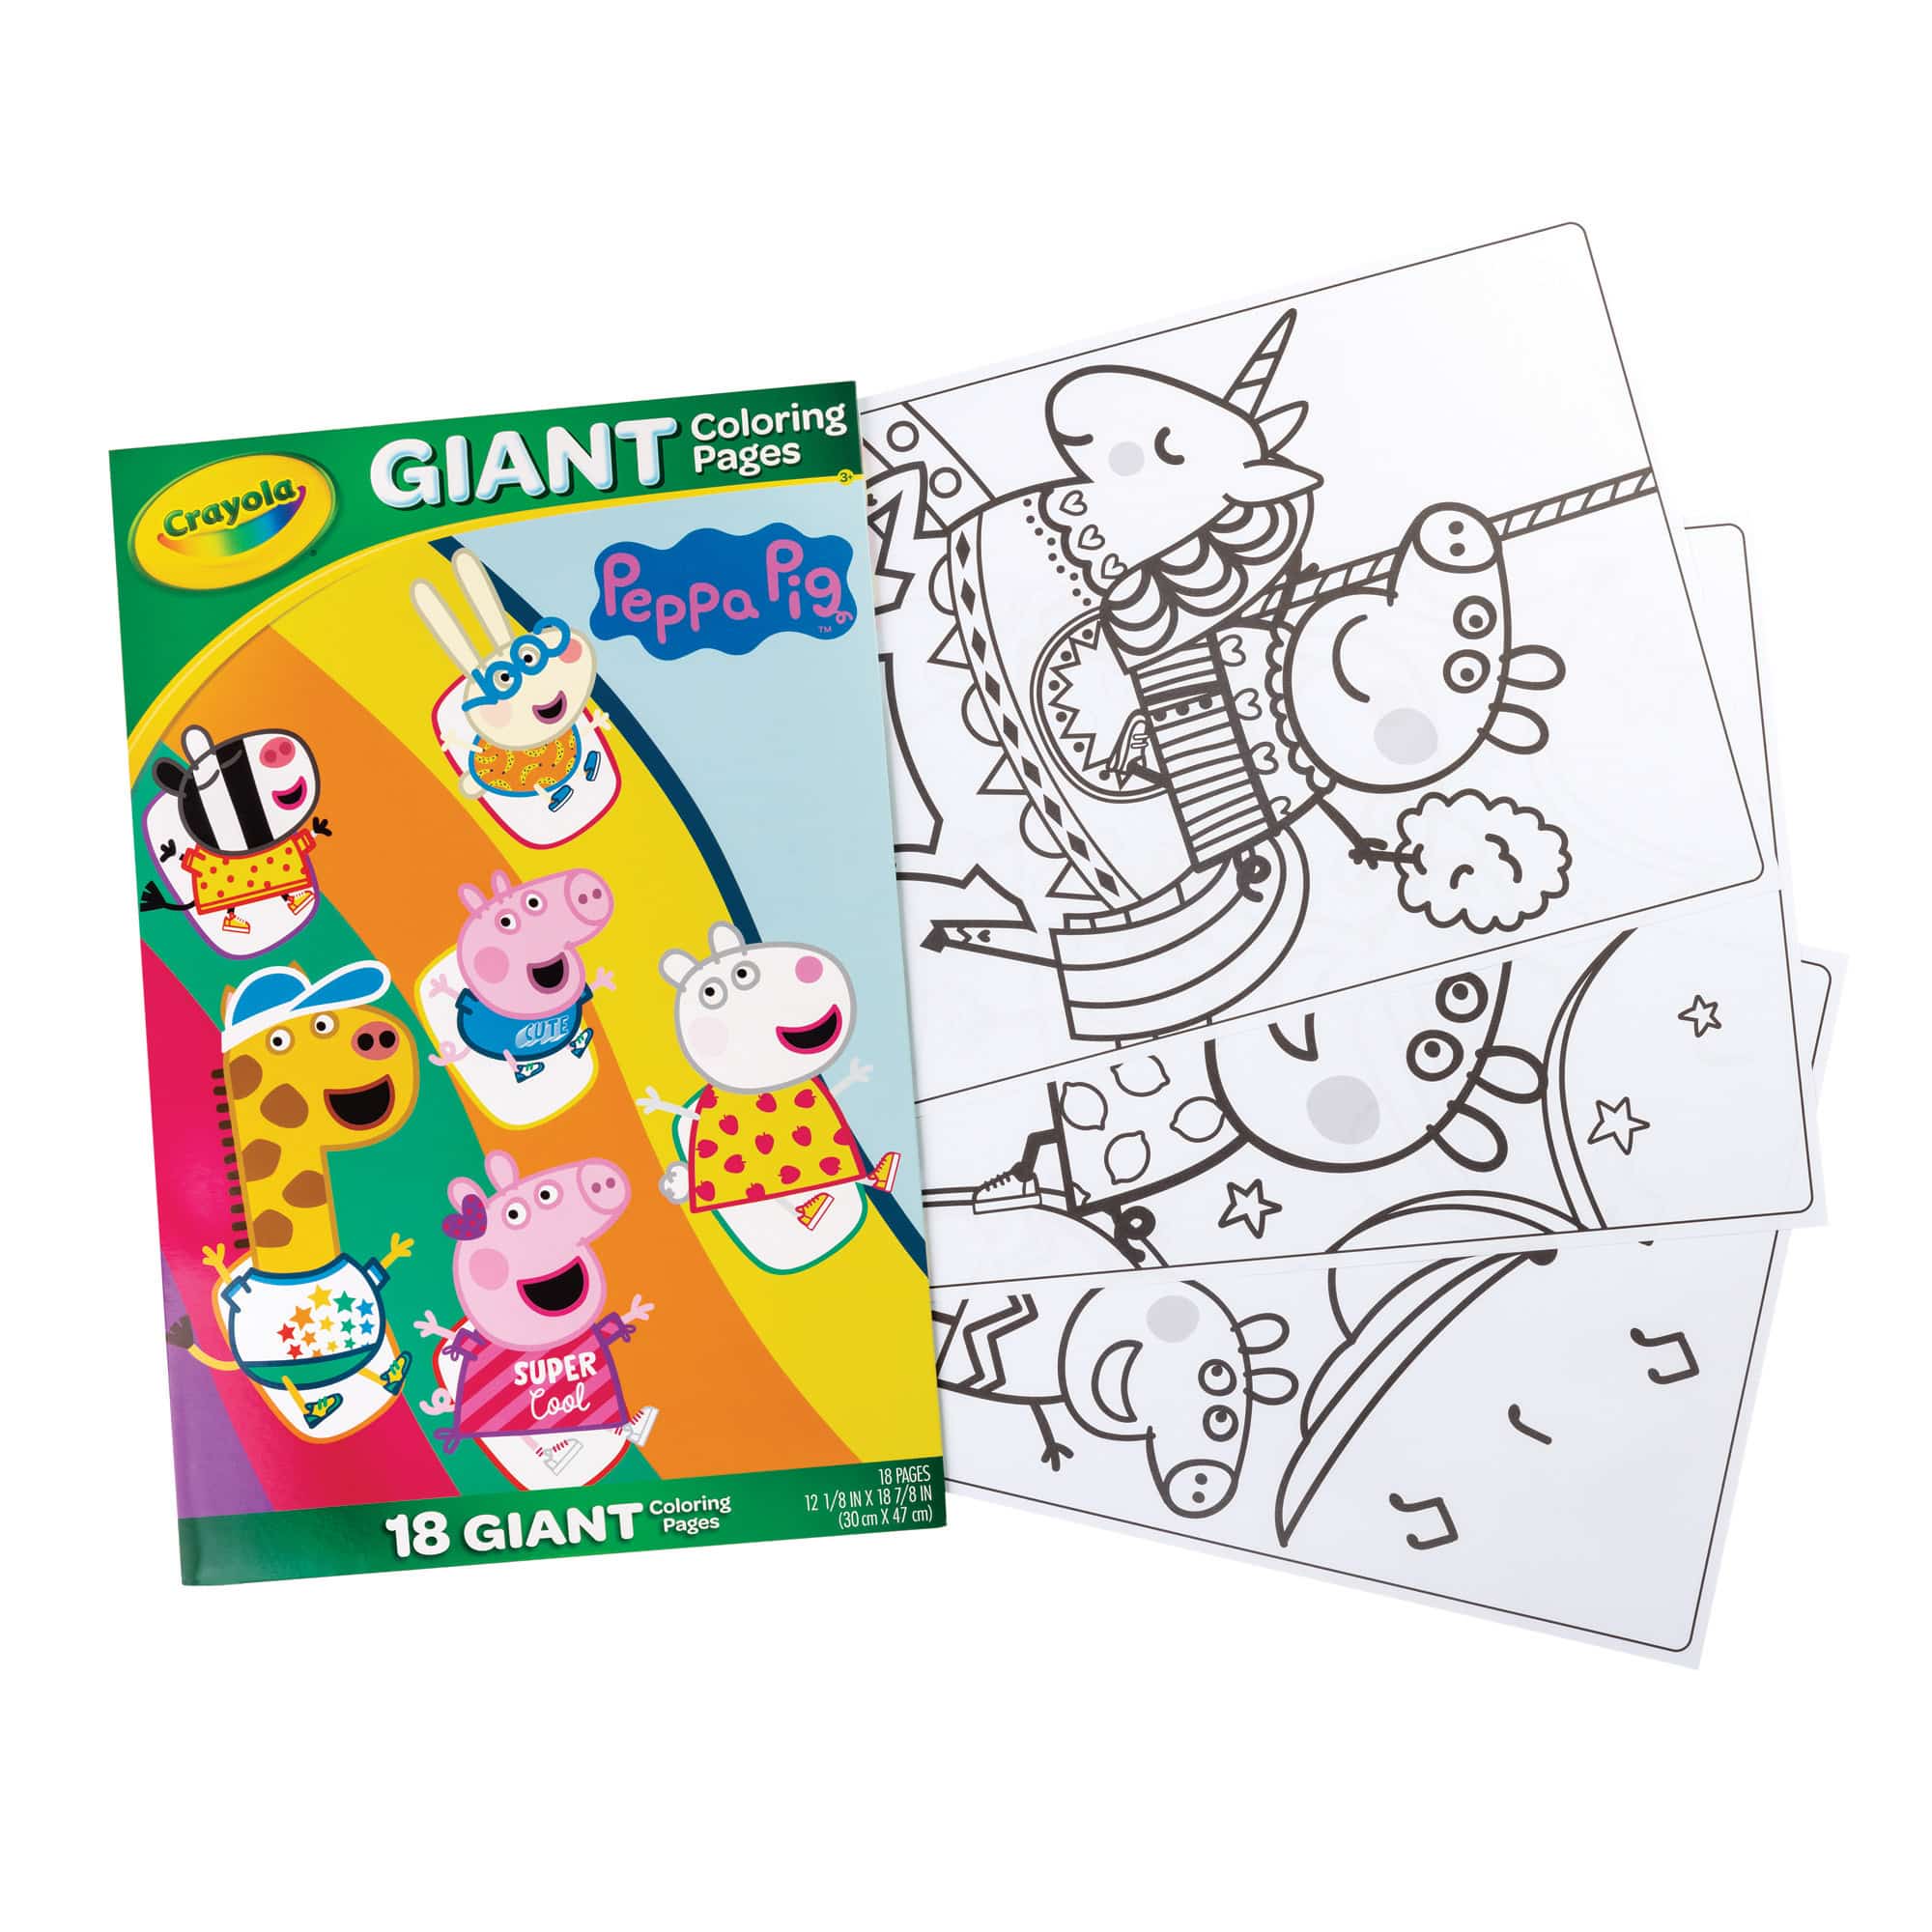 Crayola Giant Colouring Pages - Peppa Pig